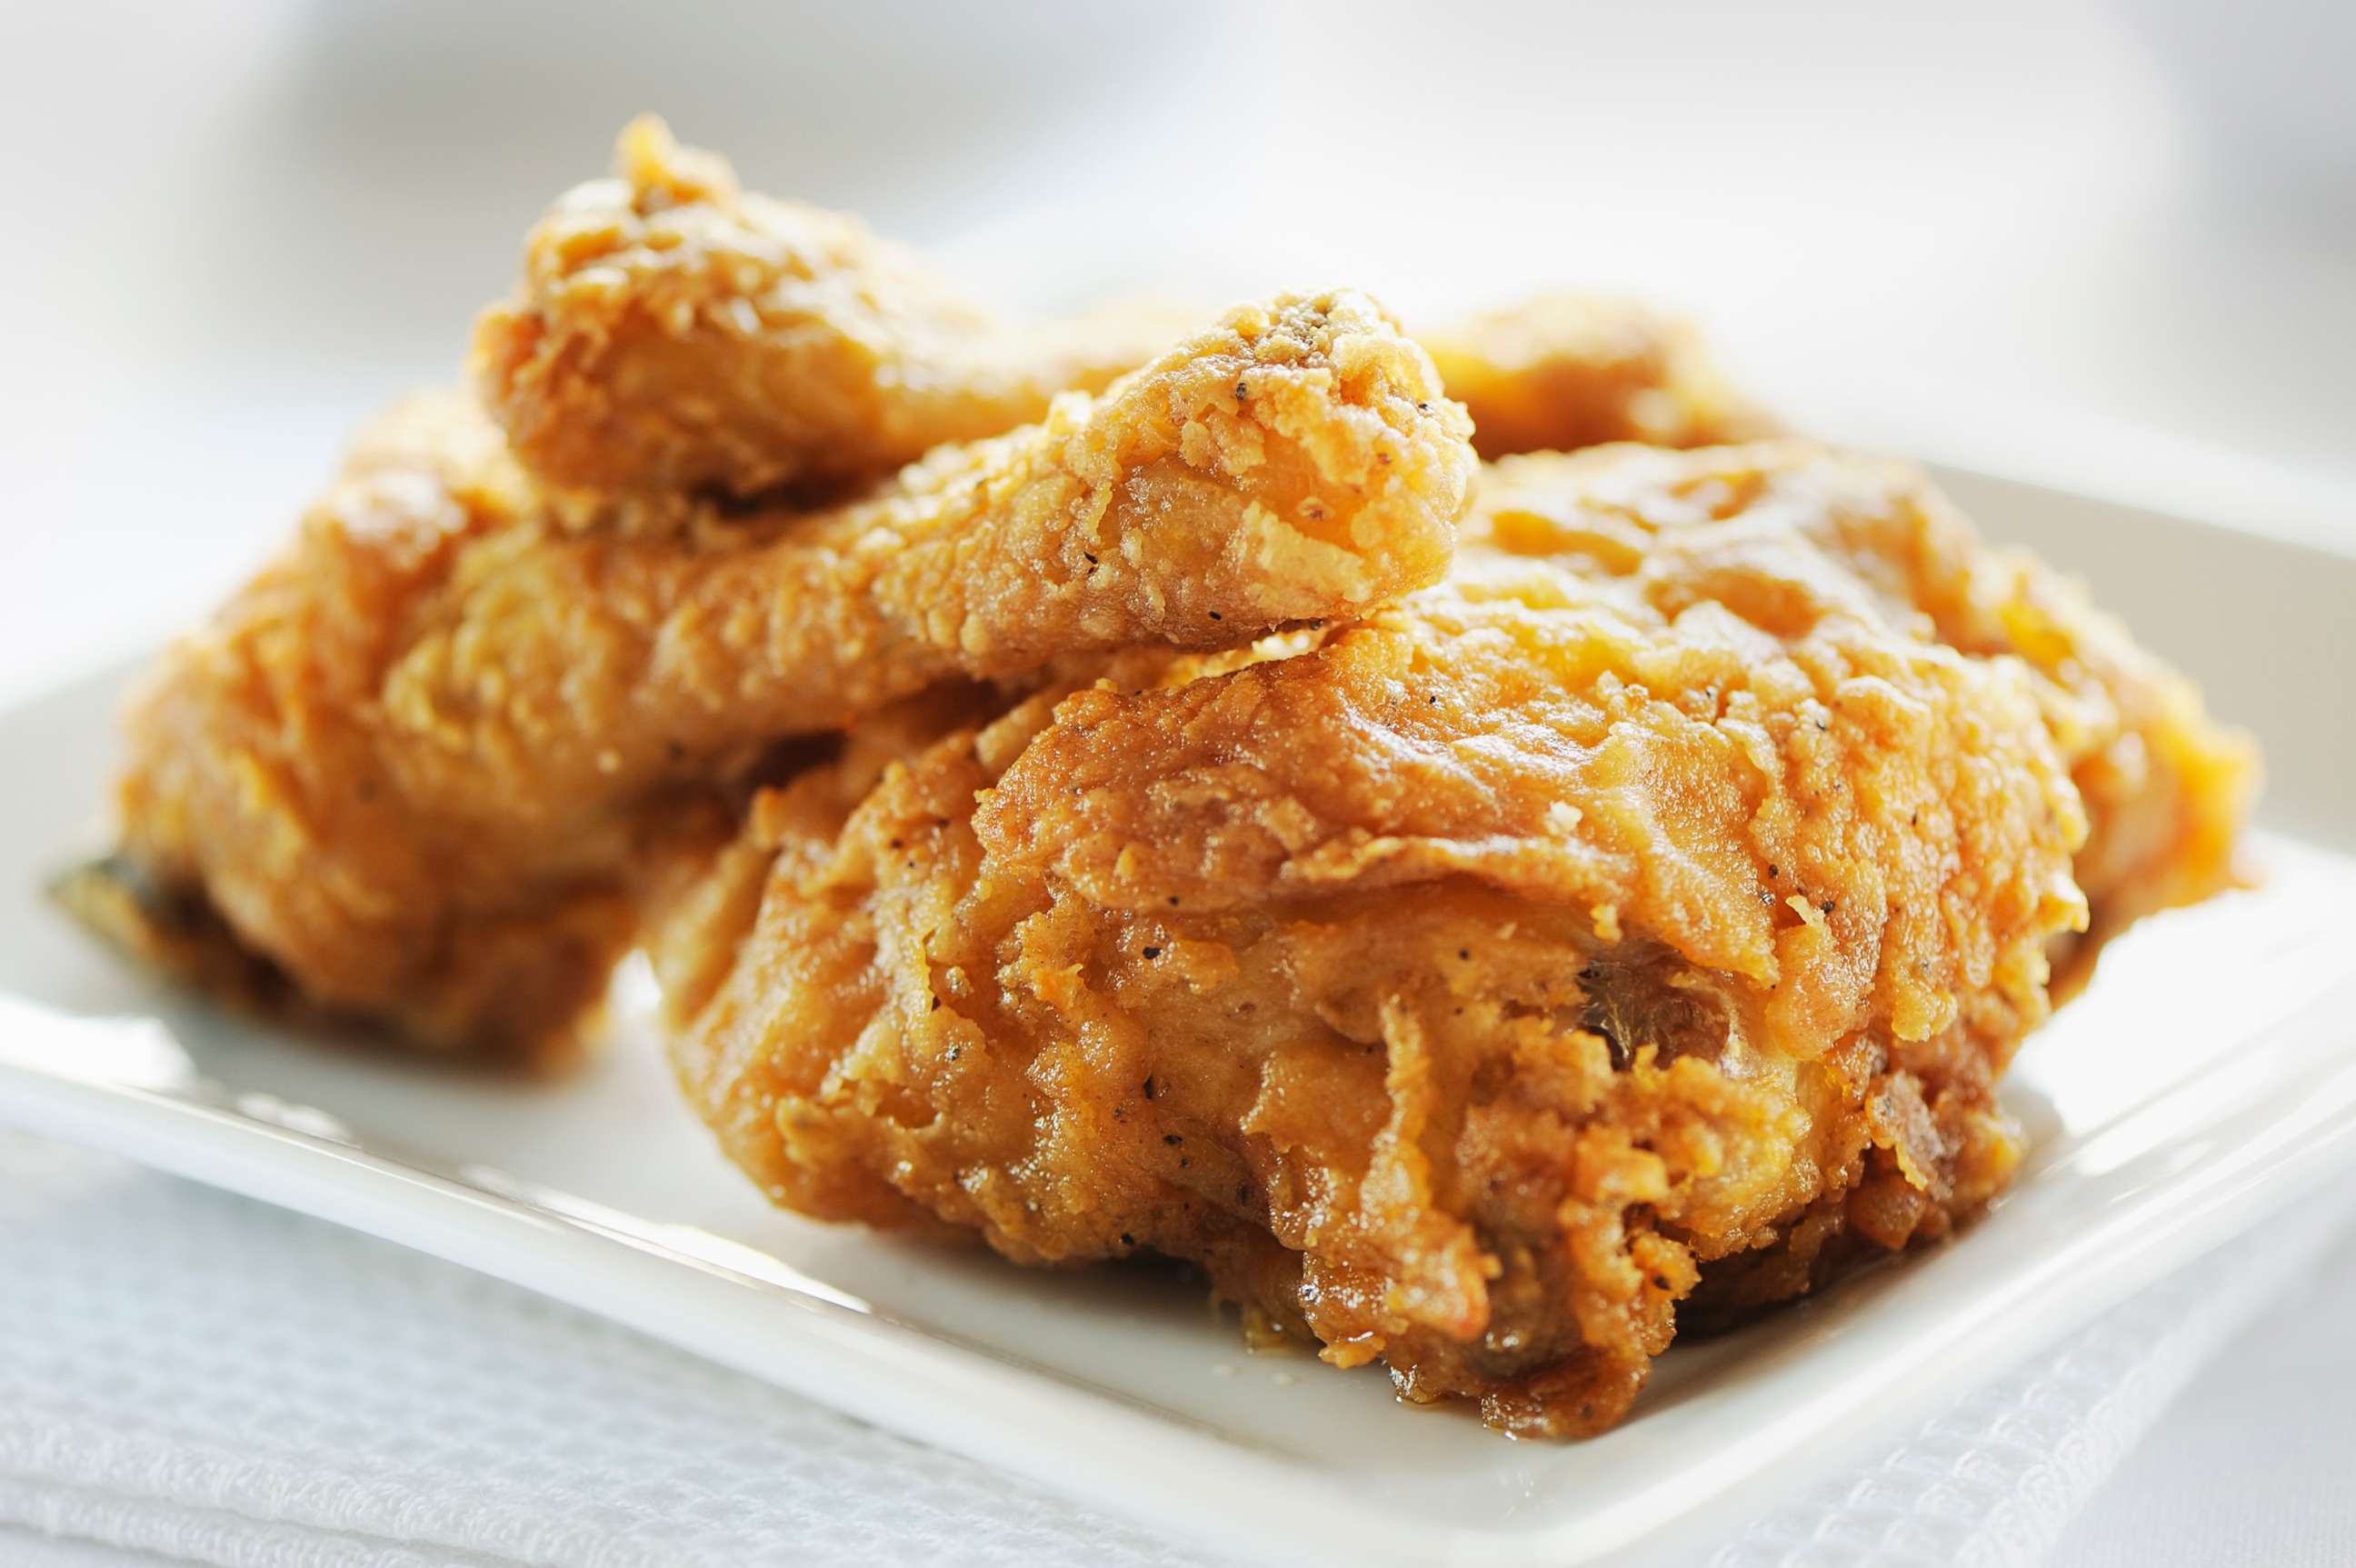 PHOTO: A plate of crispy fried chicken.